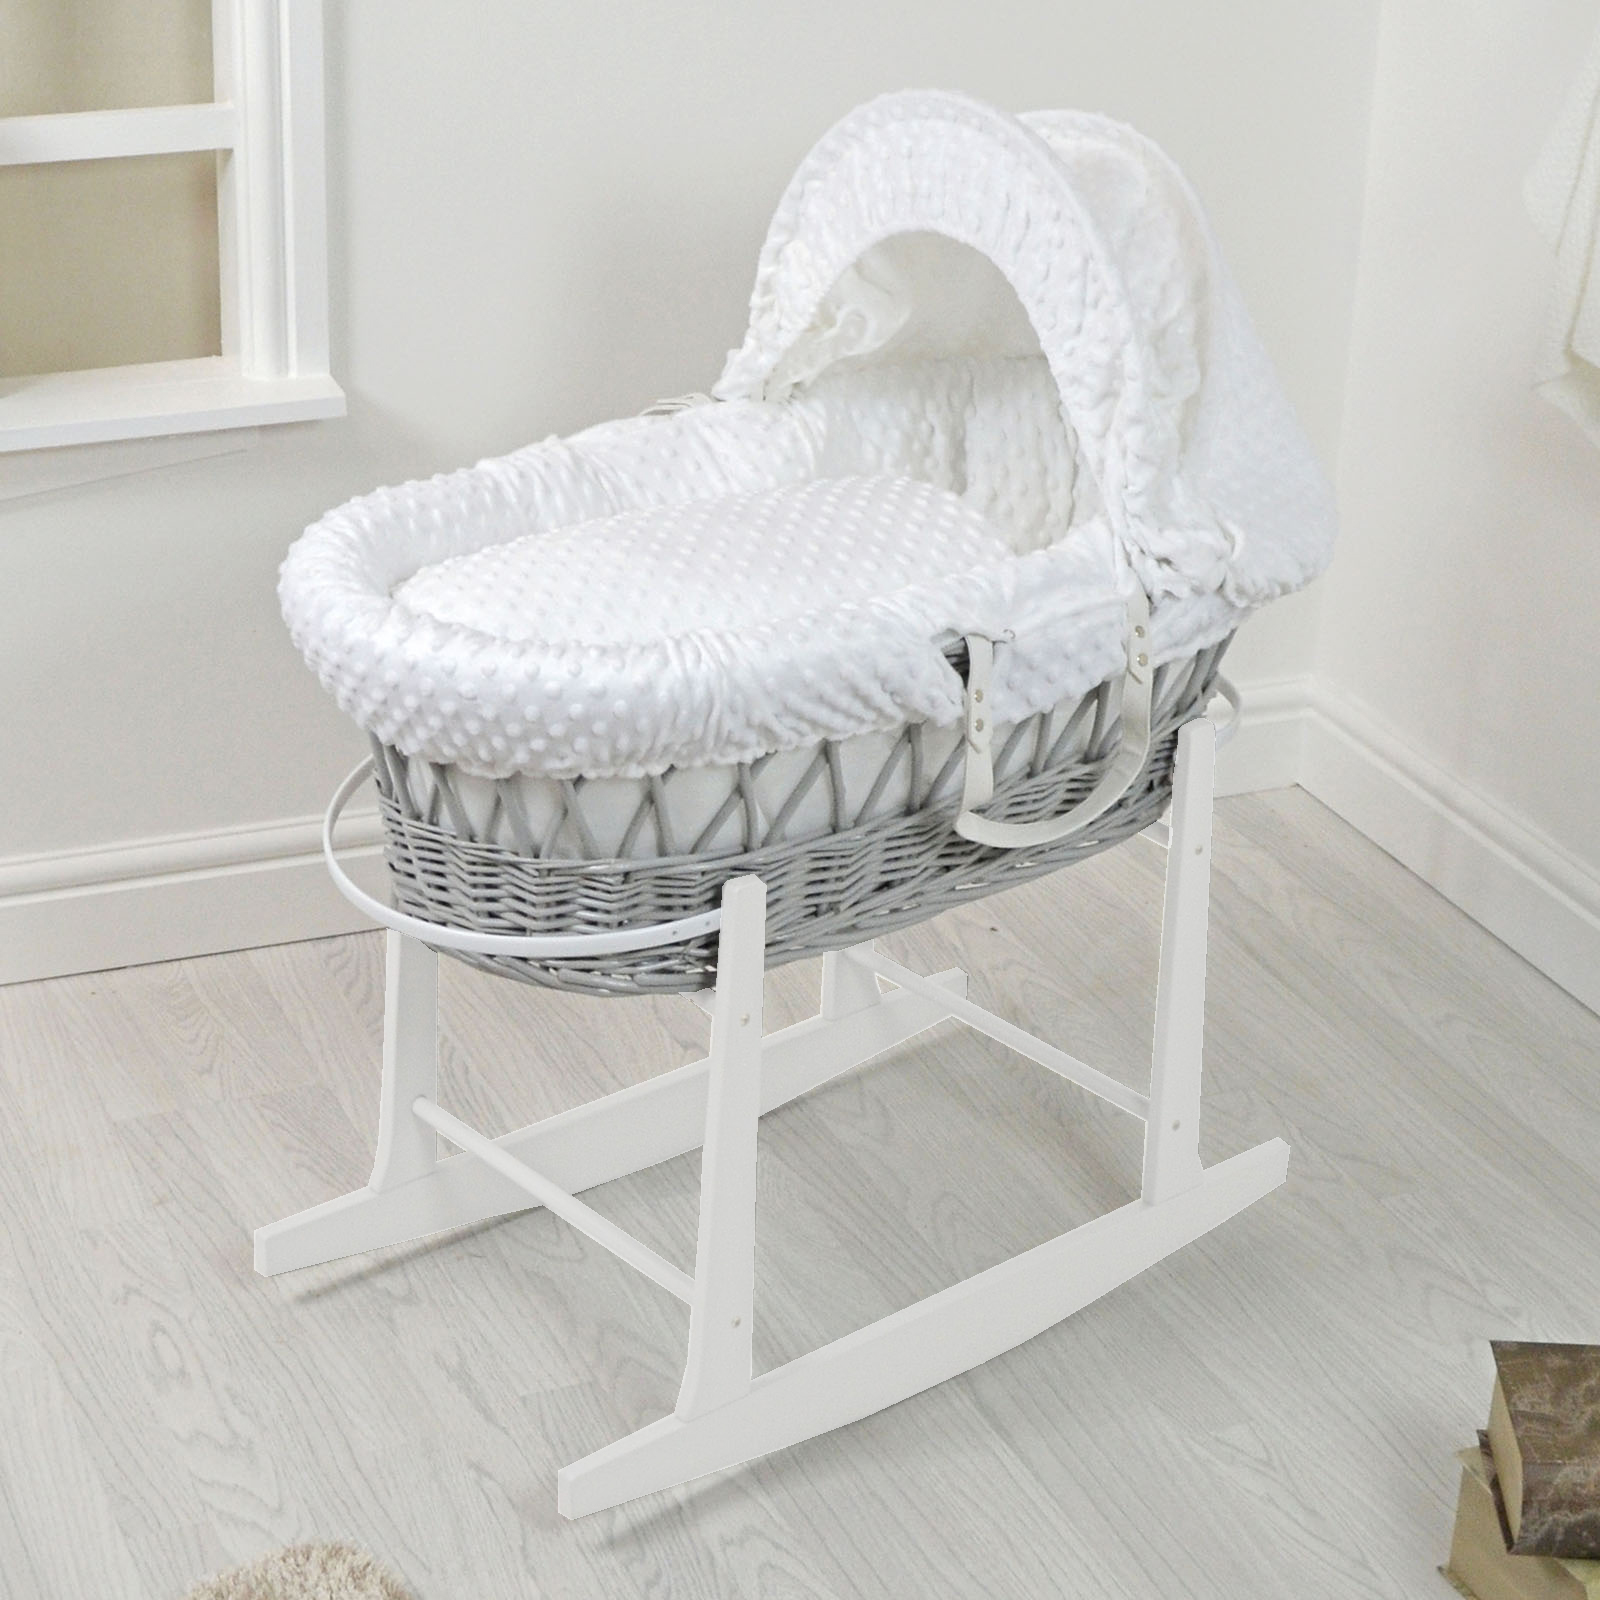 4Baby Padded Grey Wicker Moses Basket with White Rocking Stand - White Dimple